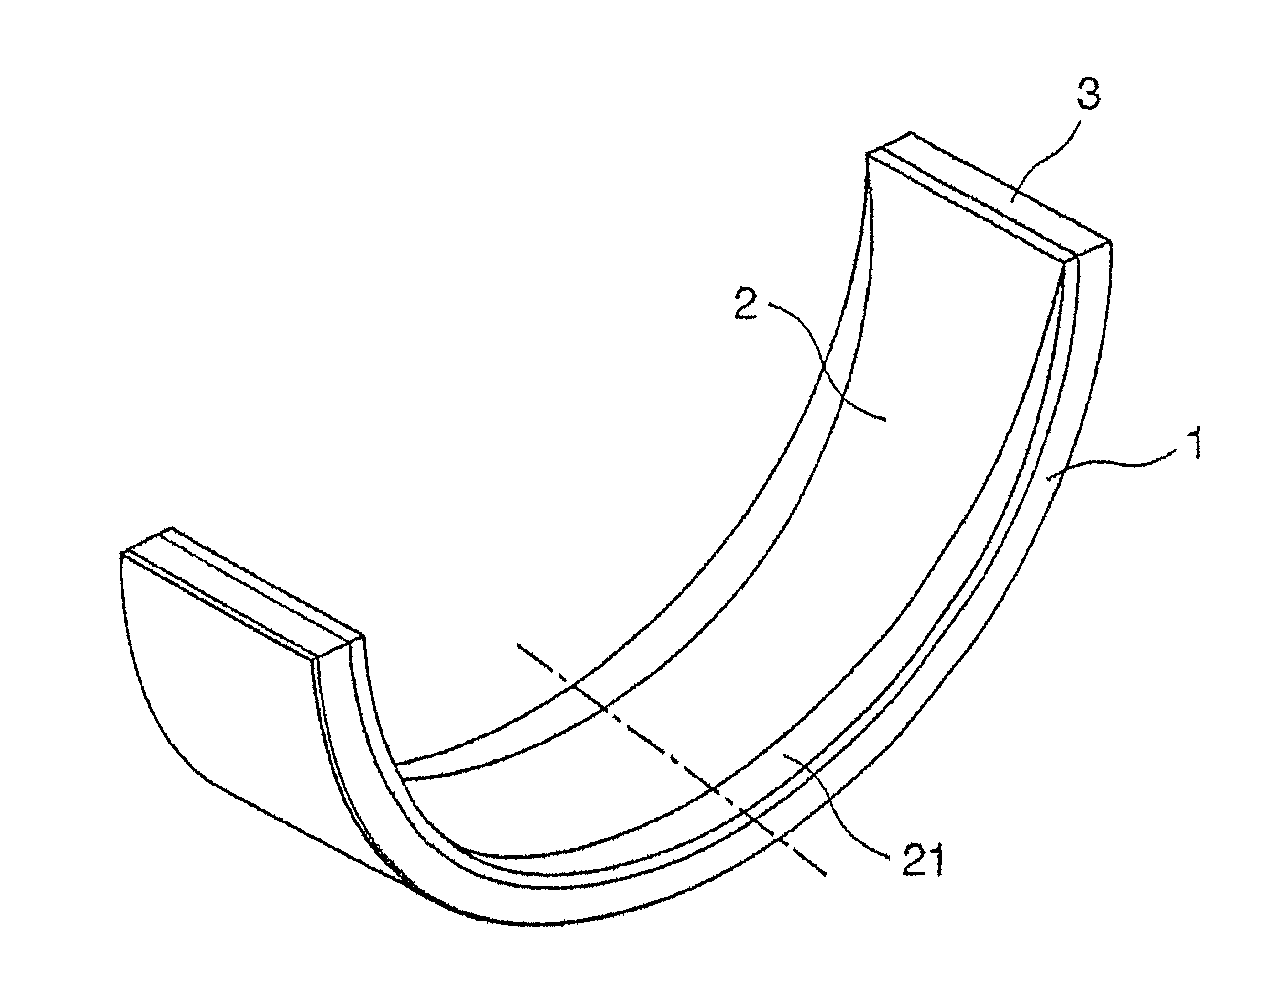 Plain bearing shell with slide face surface geometry which is profiled in the axial direction